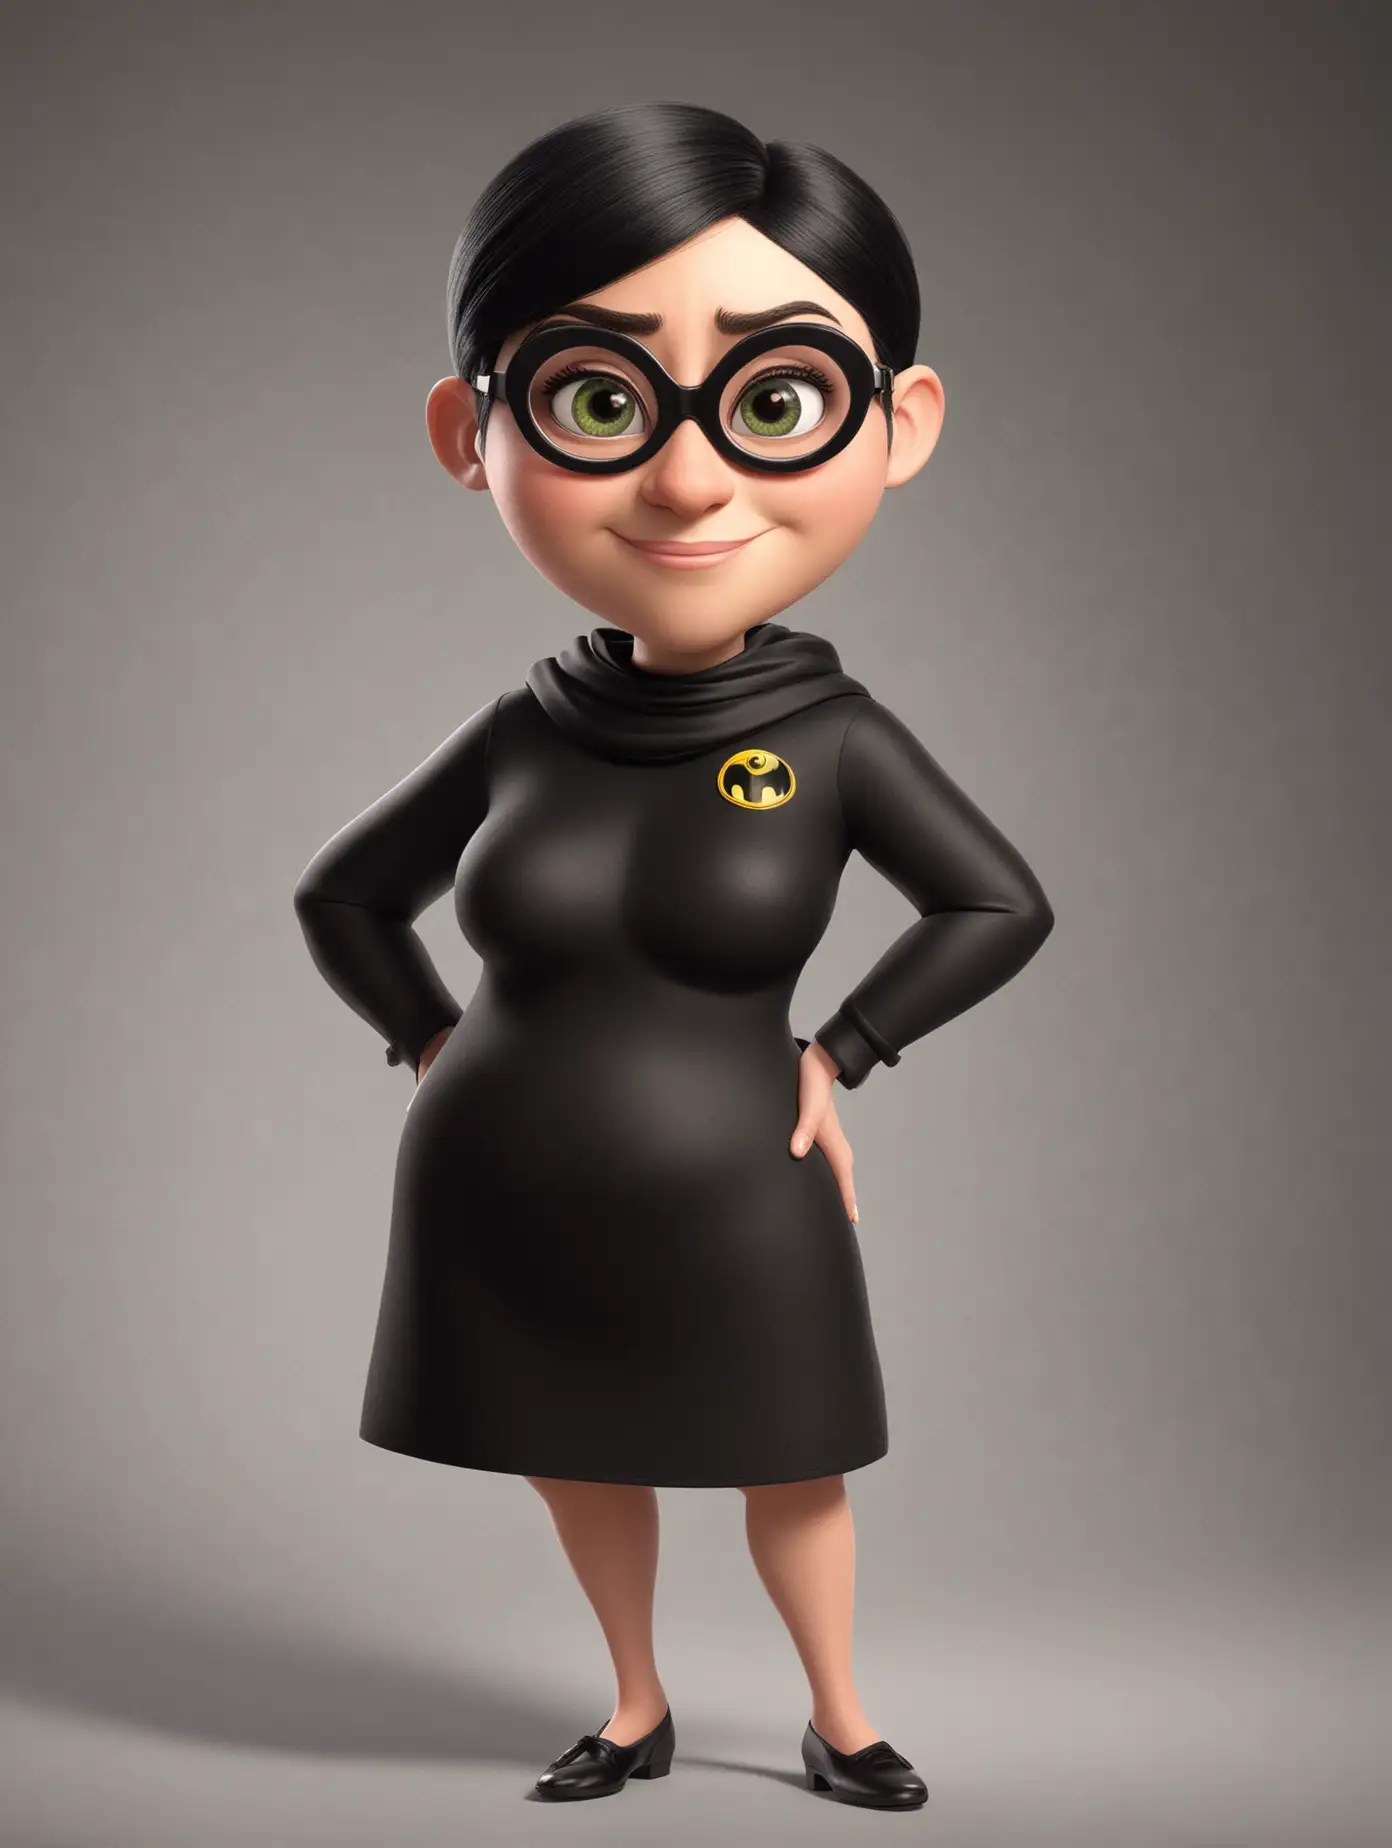 Edna Mode from The Incredibles Creating Stylish Superhero Costumes